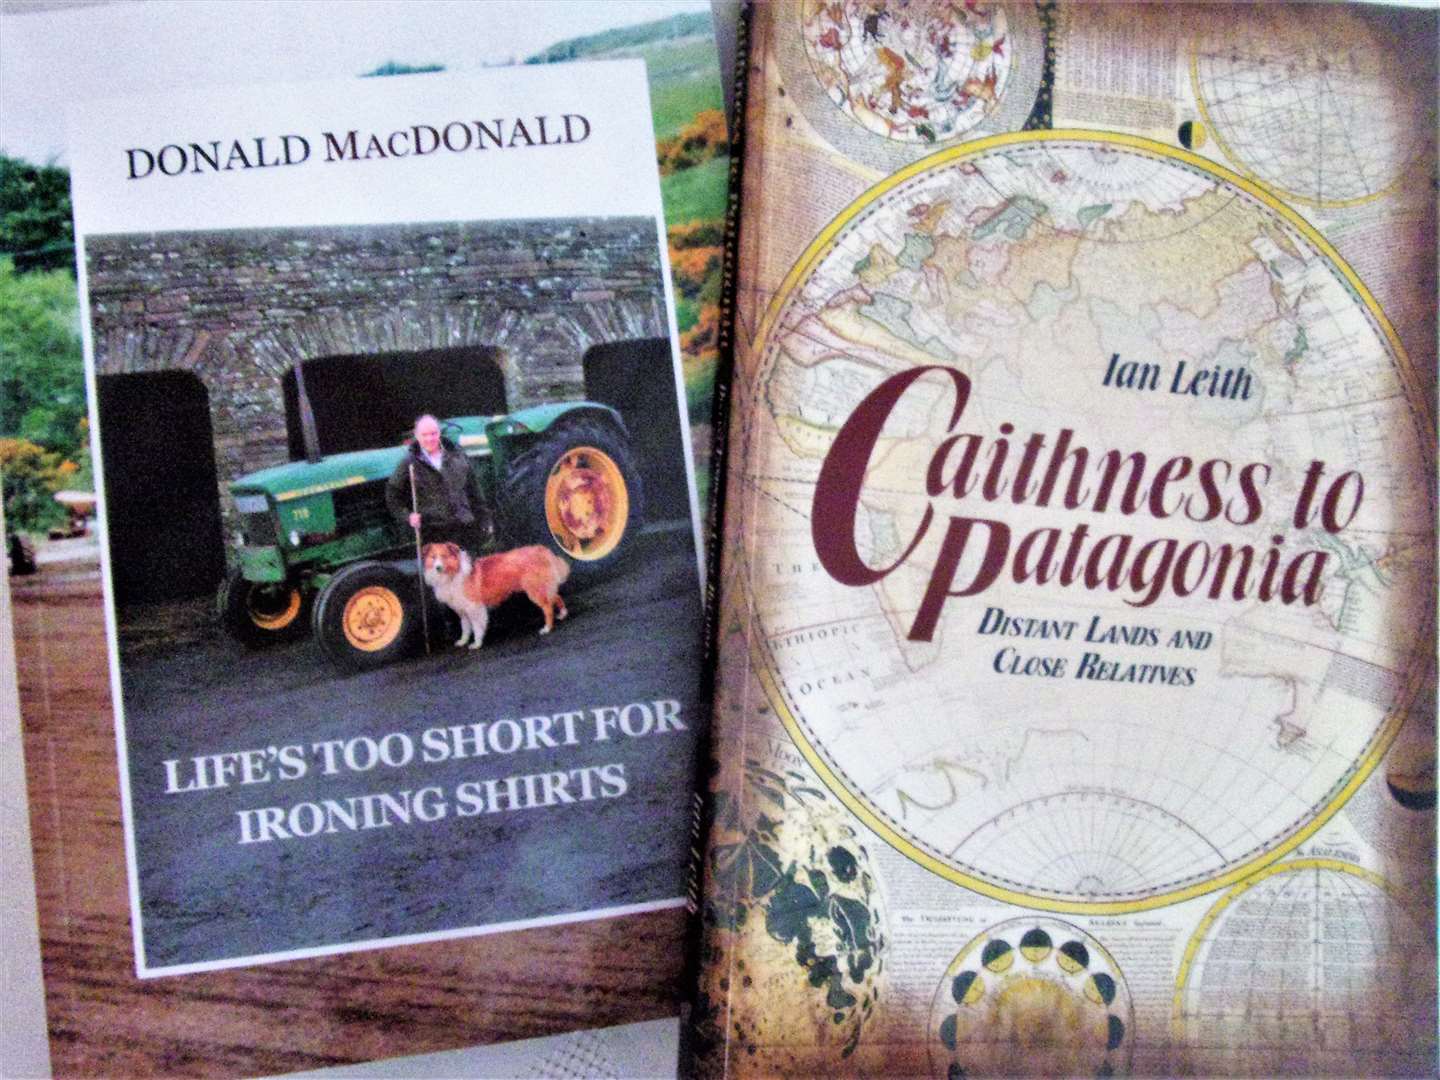 Books discussed will be 'Life’s Too Short For Ironing Shirts' by Donald Macdonald and 'Home and Away; Life in Caithness and Patagonia' by Ian Leith.